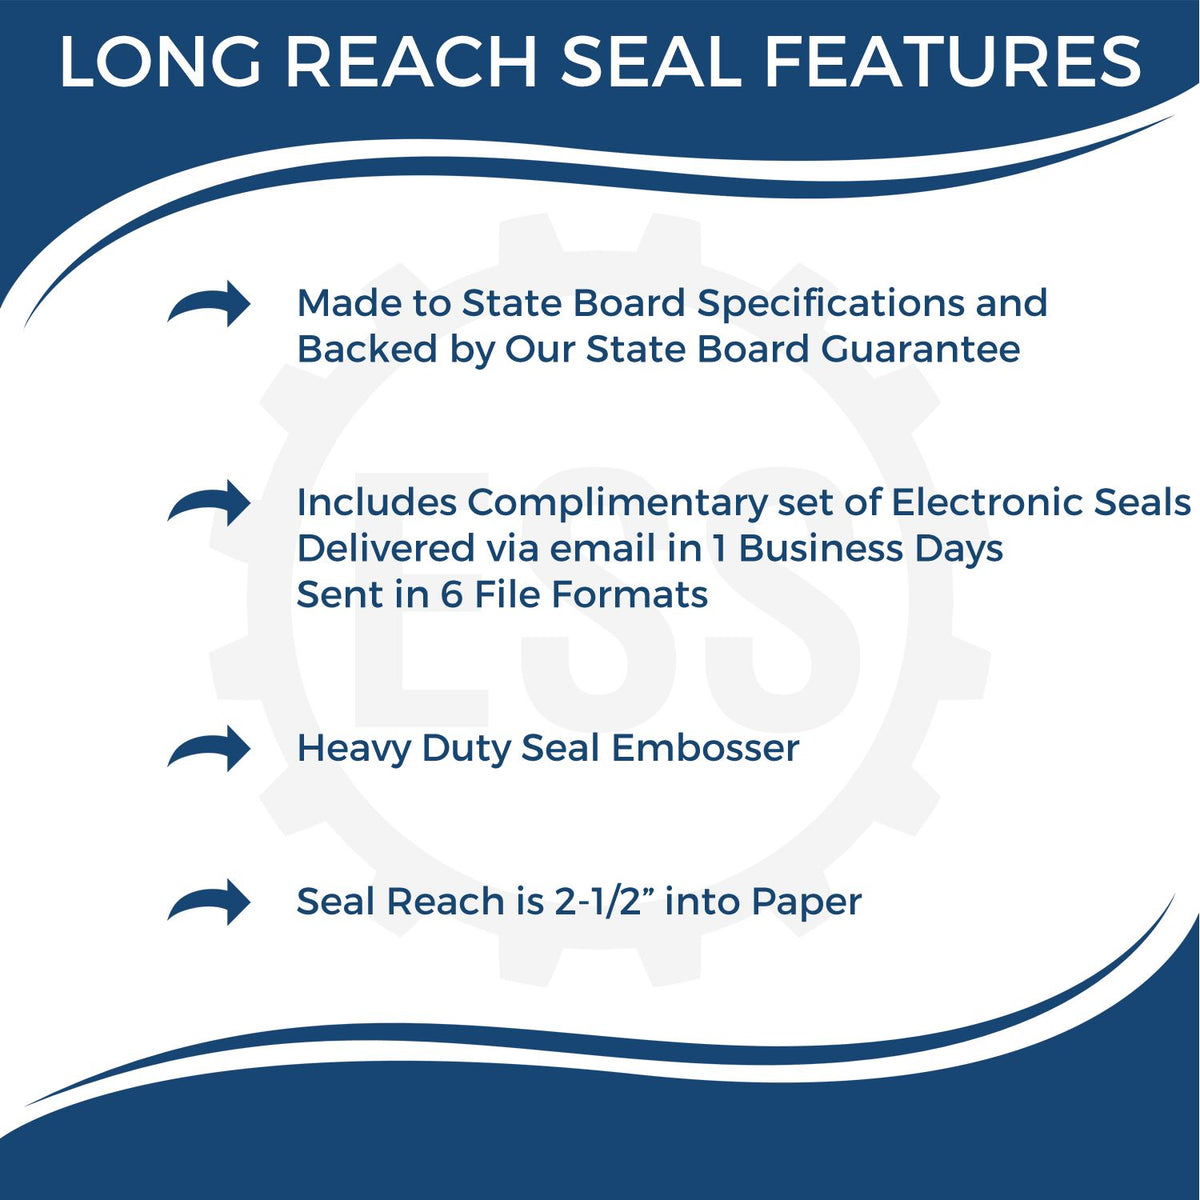 A picture of an infographic highlighting the selling points for the Long Reach Indiana PE Seal